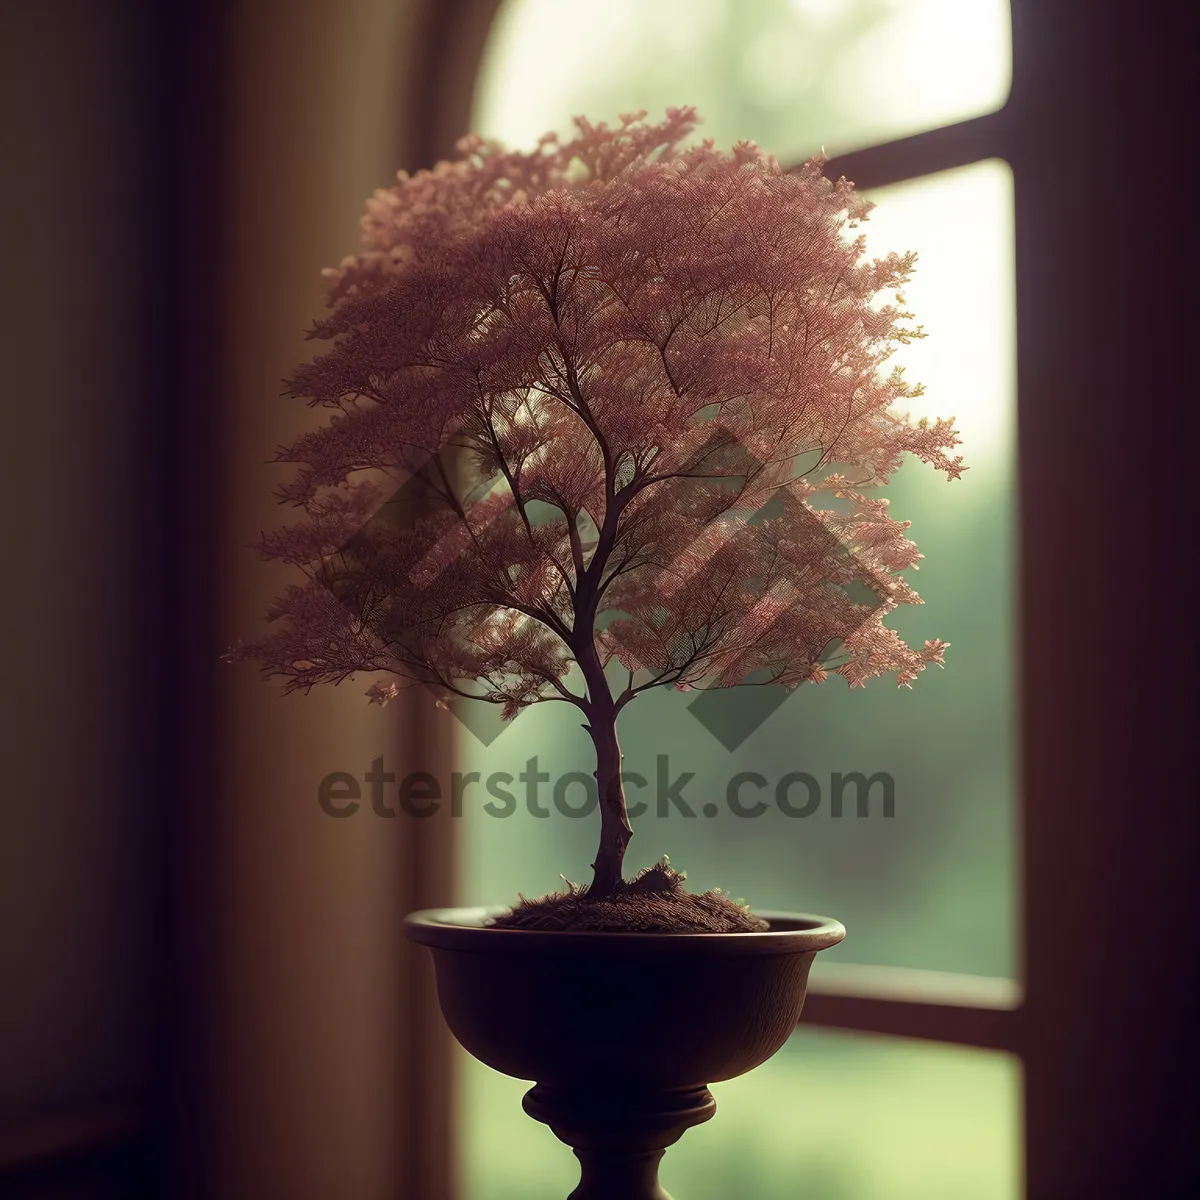 Picture of Bonsai Tree in Vase With Bird Feeder